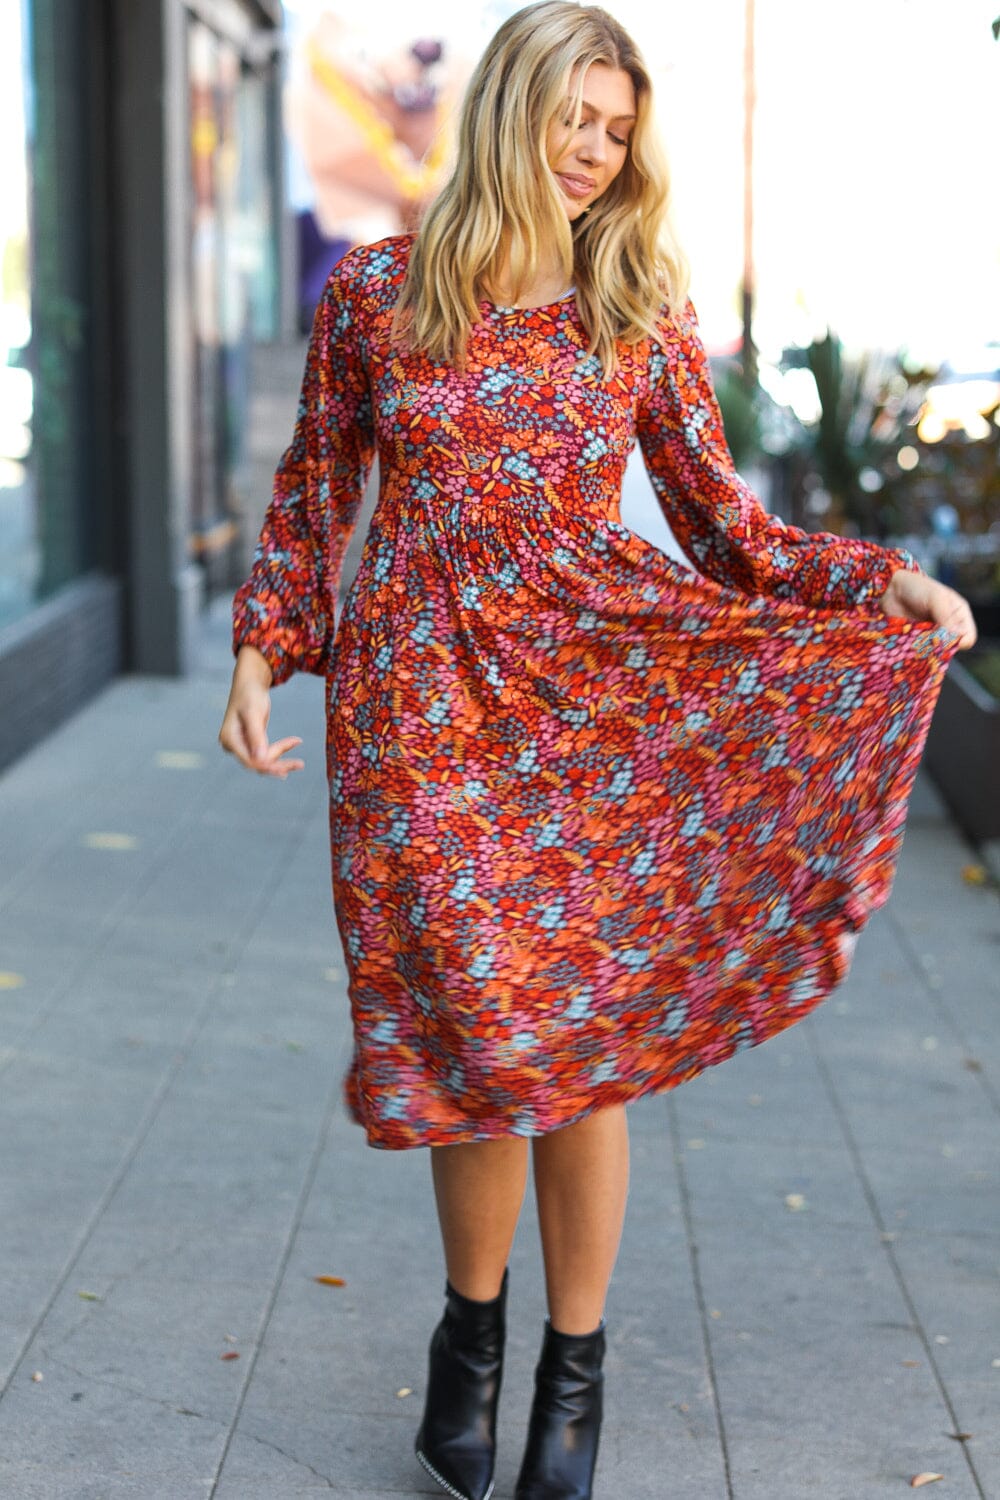 Just For Me Rust Ditzy Floral Fit & Flare Midi Dress Haptics 